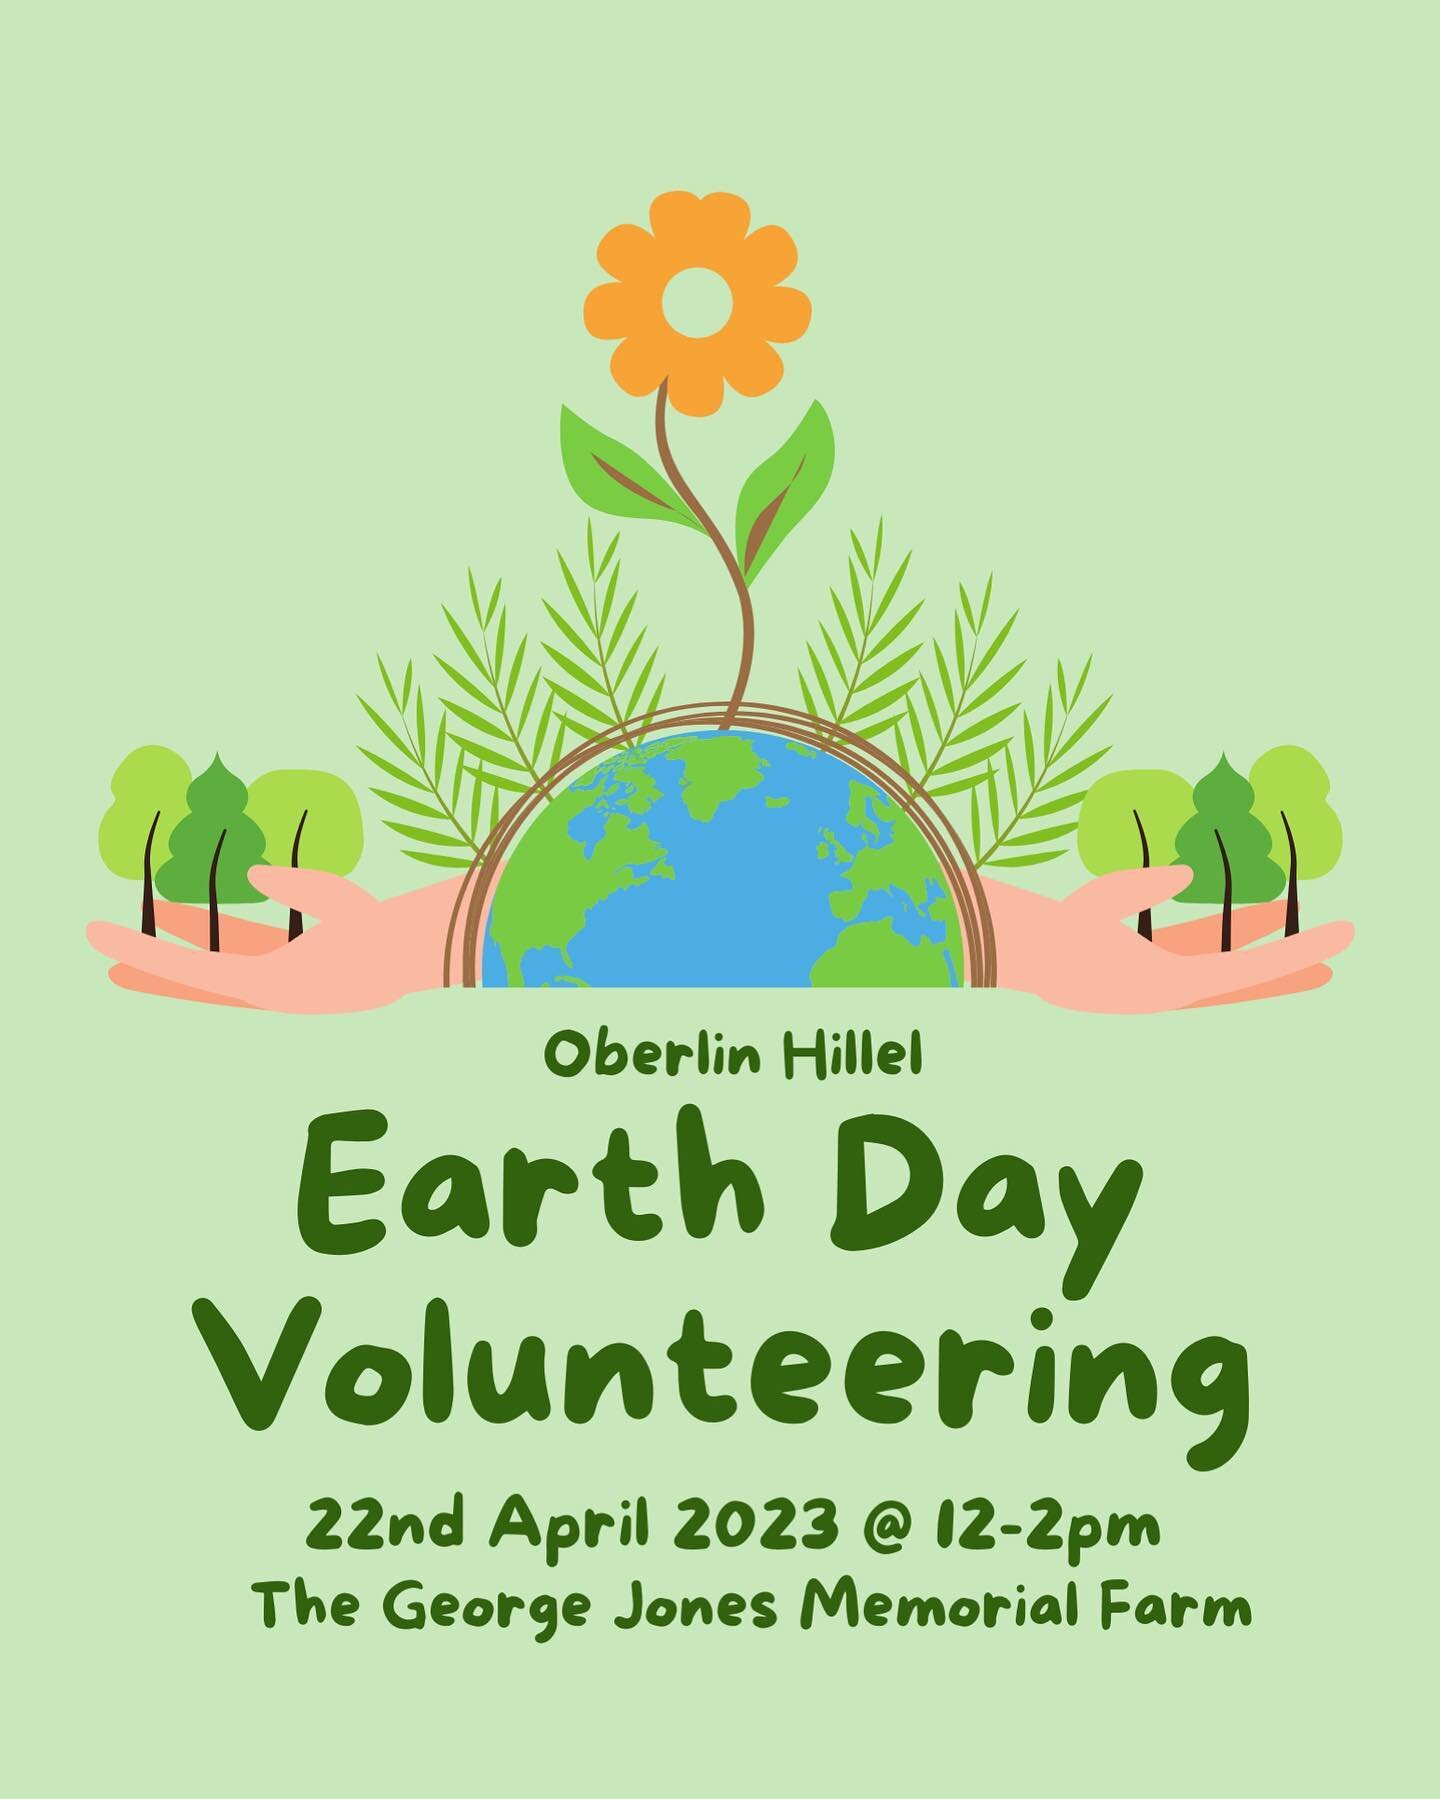 Join Oberlin Hillel on Saturday, April 22nd for a very special Earth Day volunteering opportunity. We will be going to the nearby George Jones Memorial Farm from 12-2 pm. Meet at Tappan Square Bandstand at 11 am if you&rsquo;d like to walk over with 